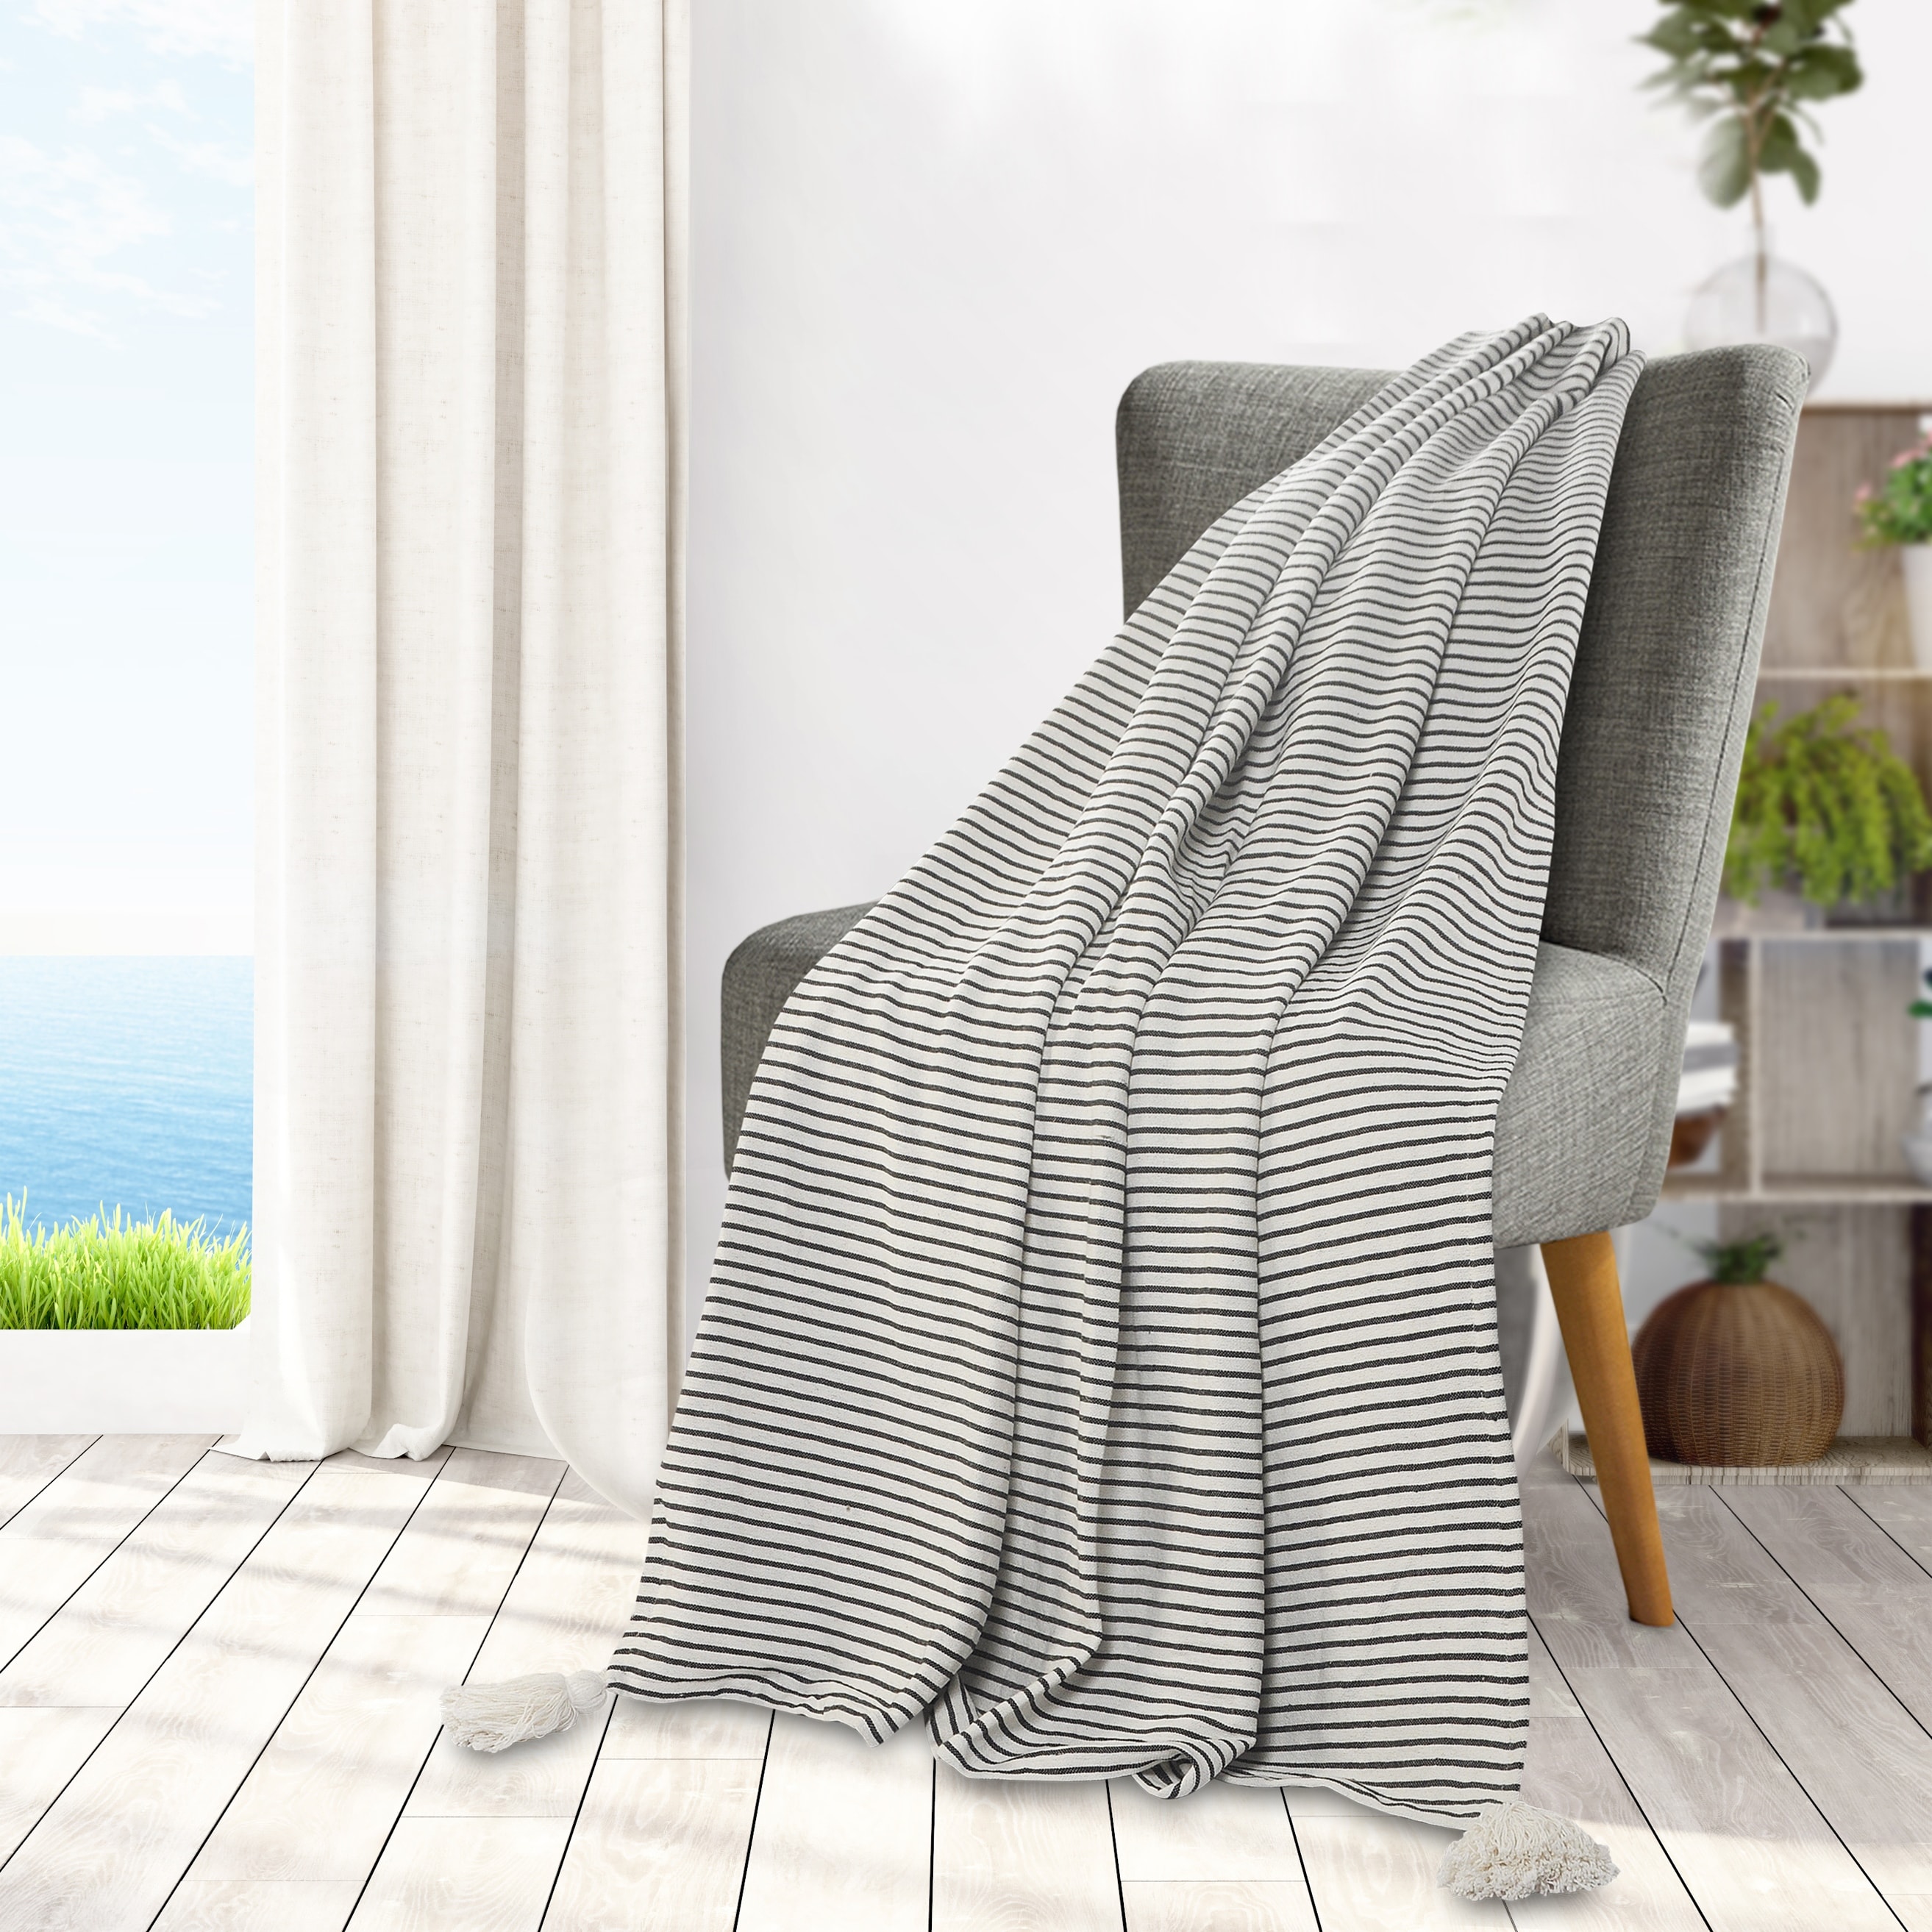 Black And Ivory Striped Tasseled Throw Blanket Overstock 31099247